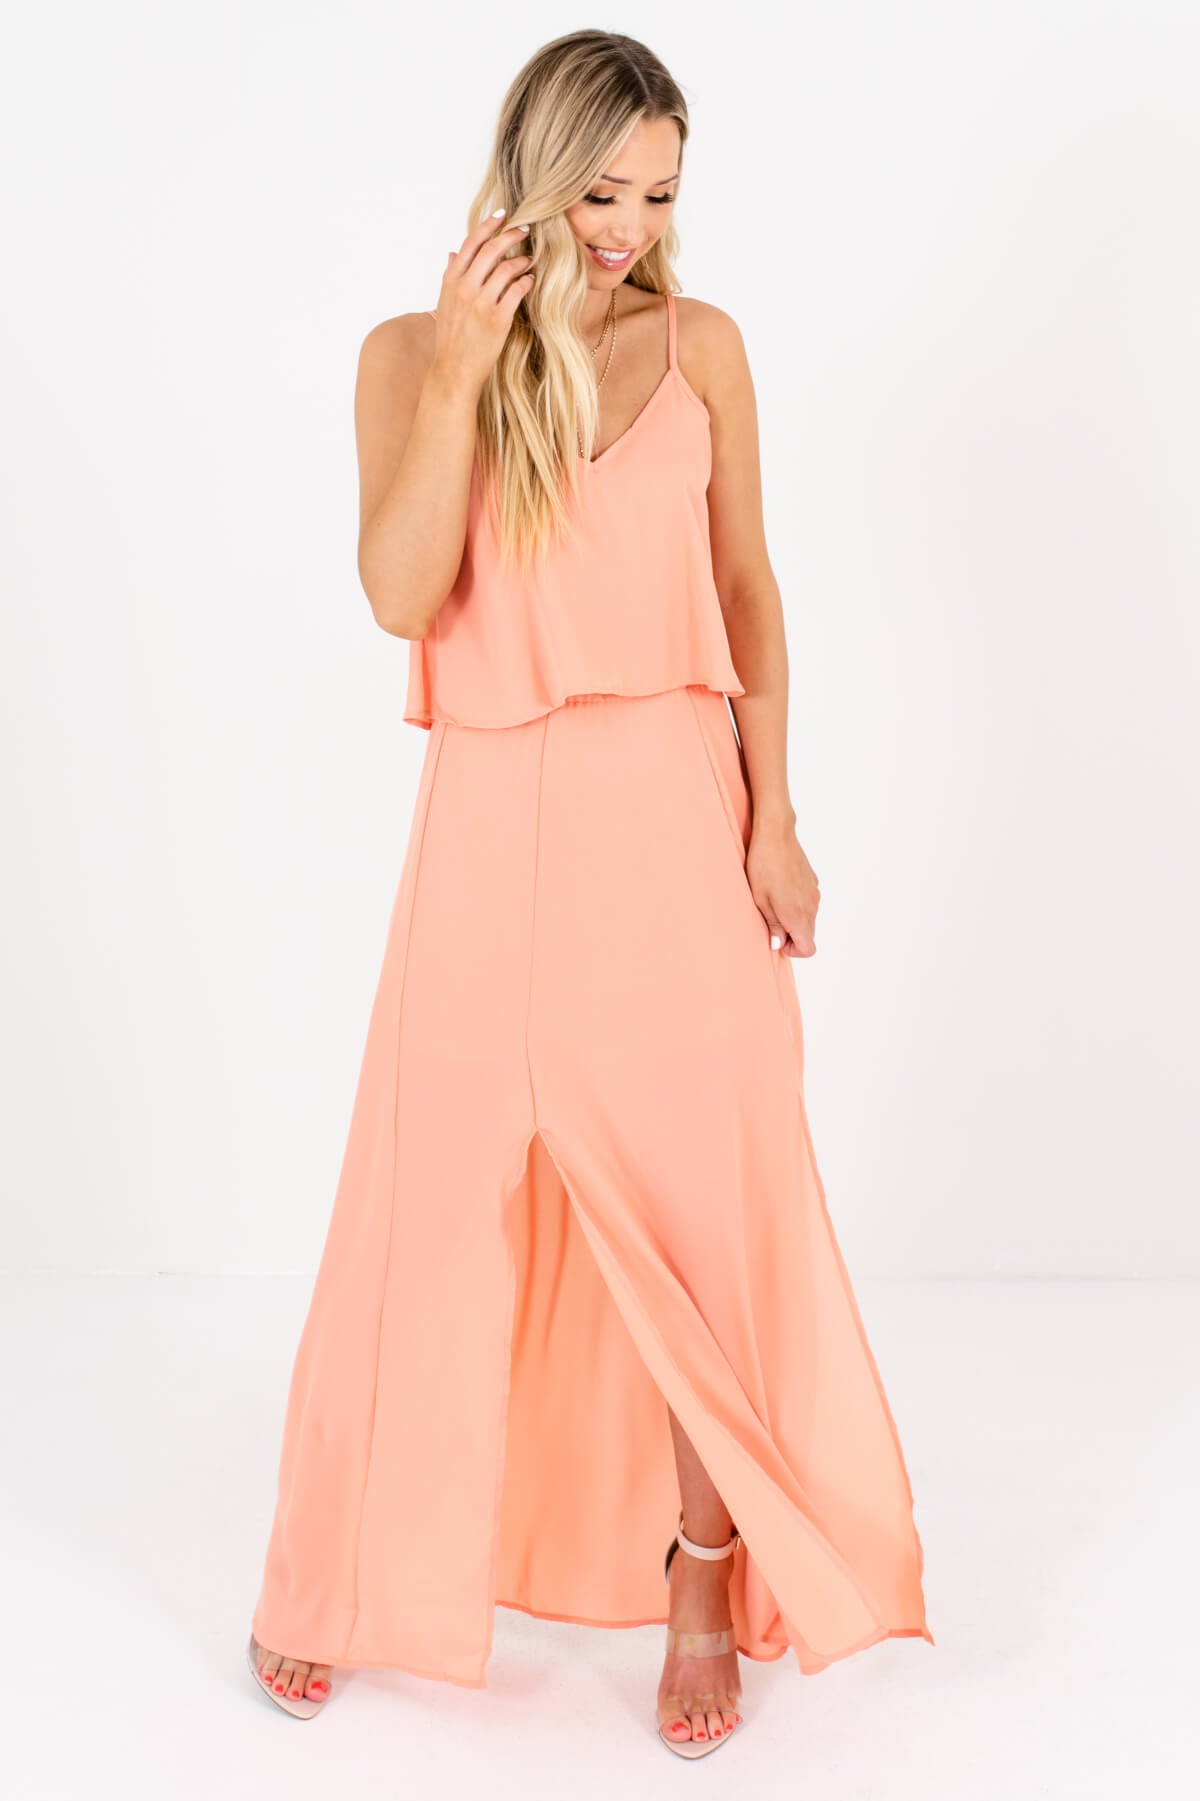 Peach Pink Cute and Comfortable Boutique Maxi Dresses for Women